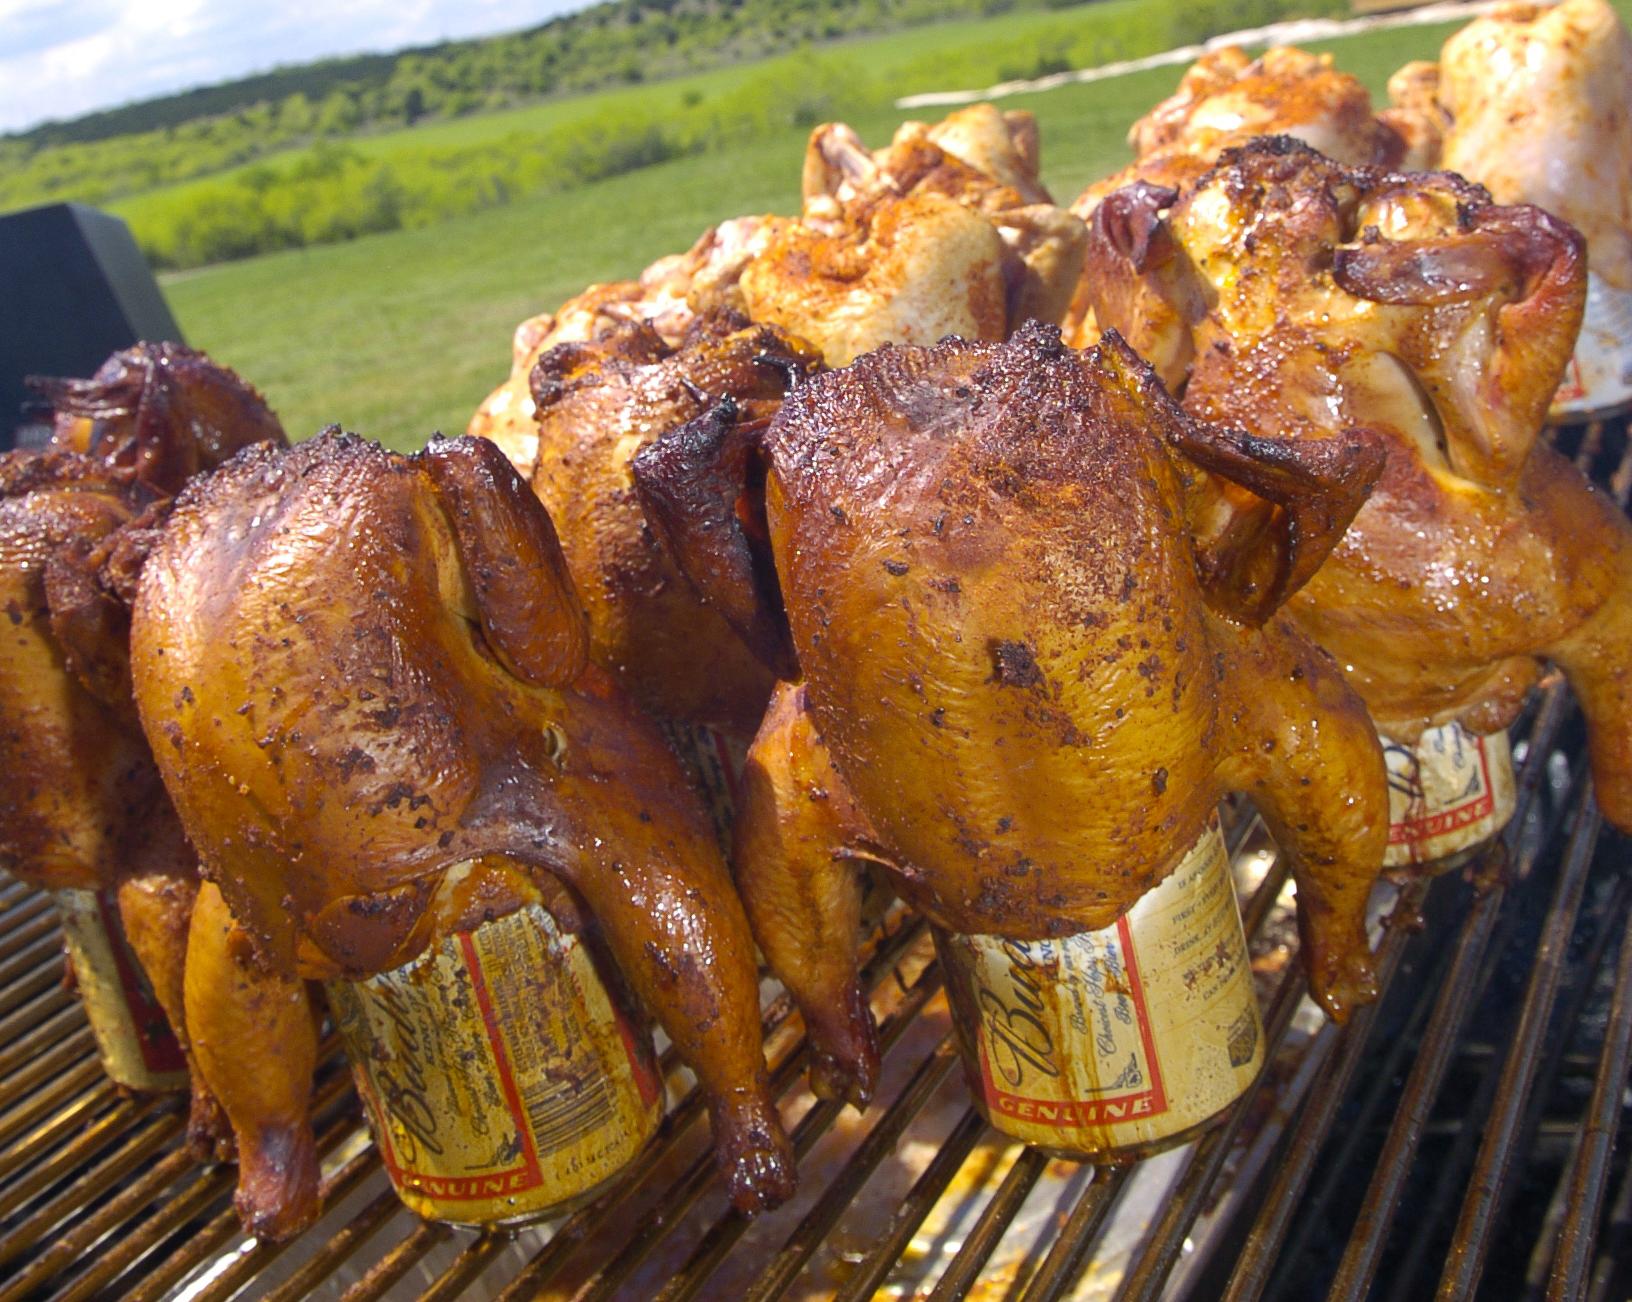 Beer can chicken doesn’t work, but here are several ways to cook with beer ...